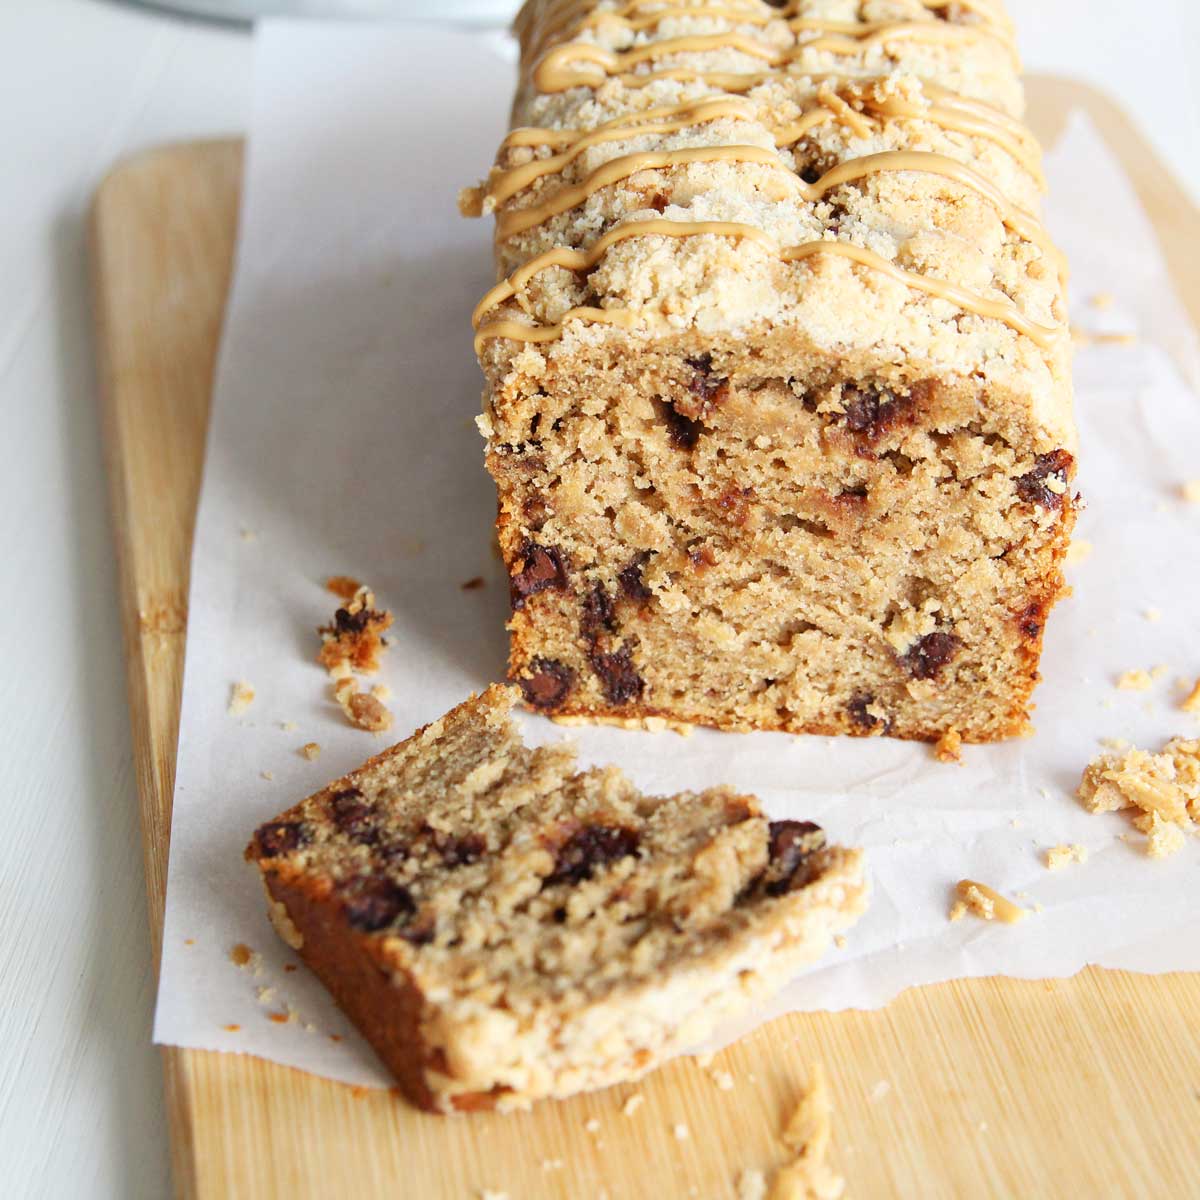 Coffee Lover's Chocolate Chip Banana Bread (No Eggs, Butter, or Dairy) - swiss roll